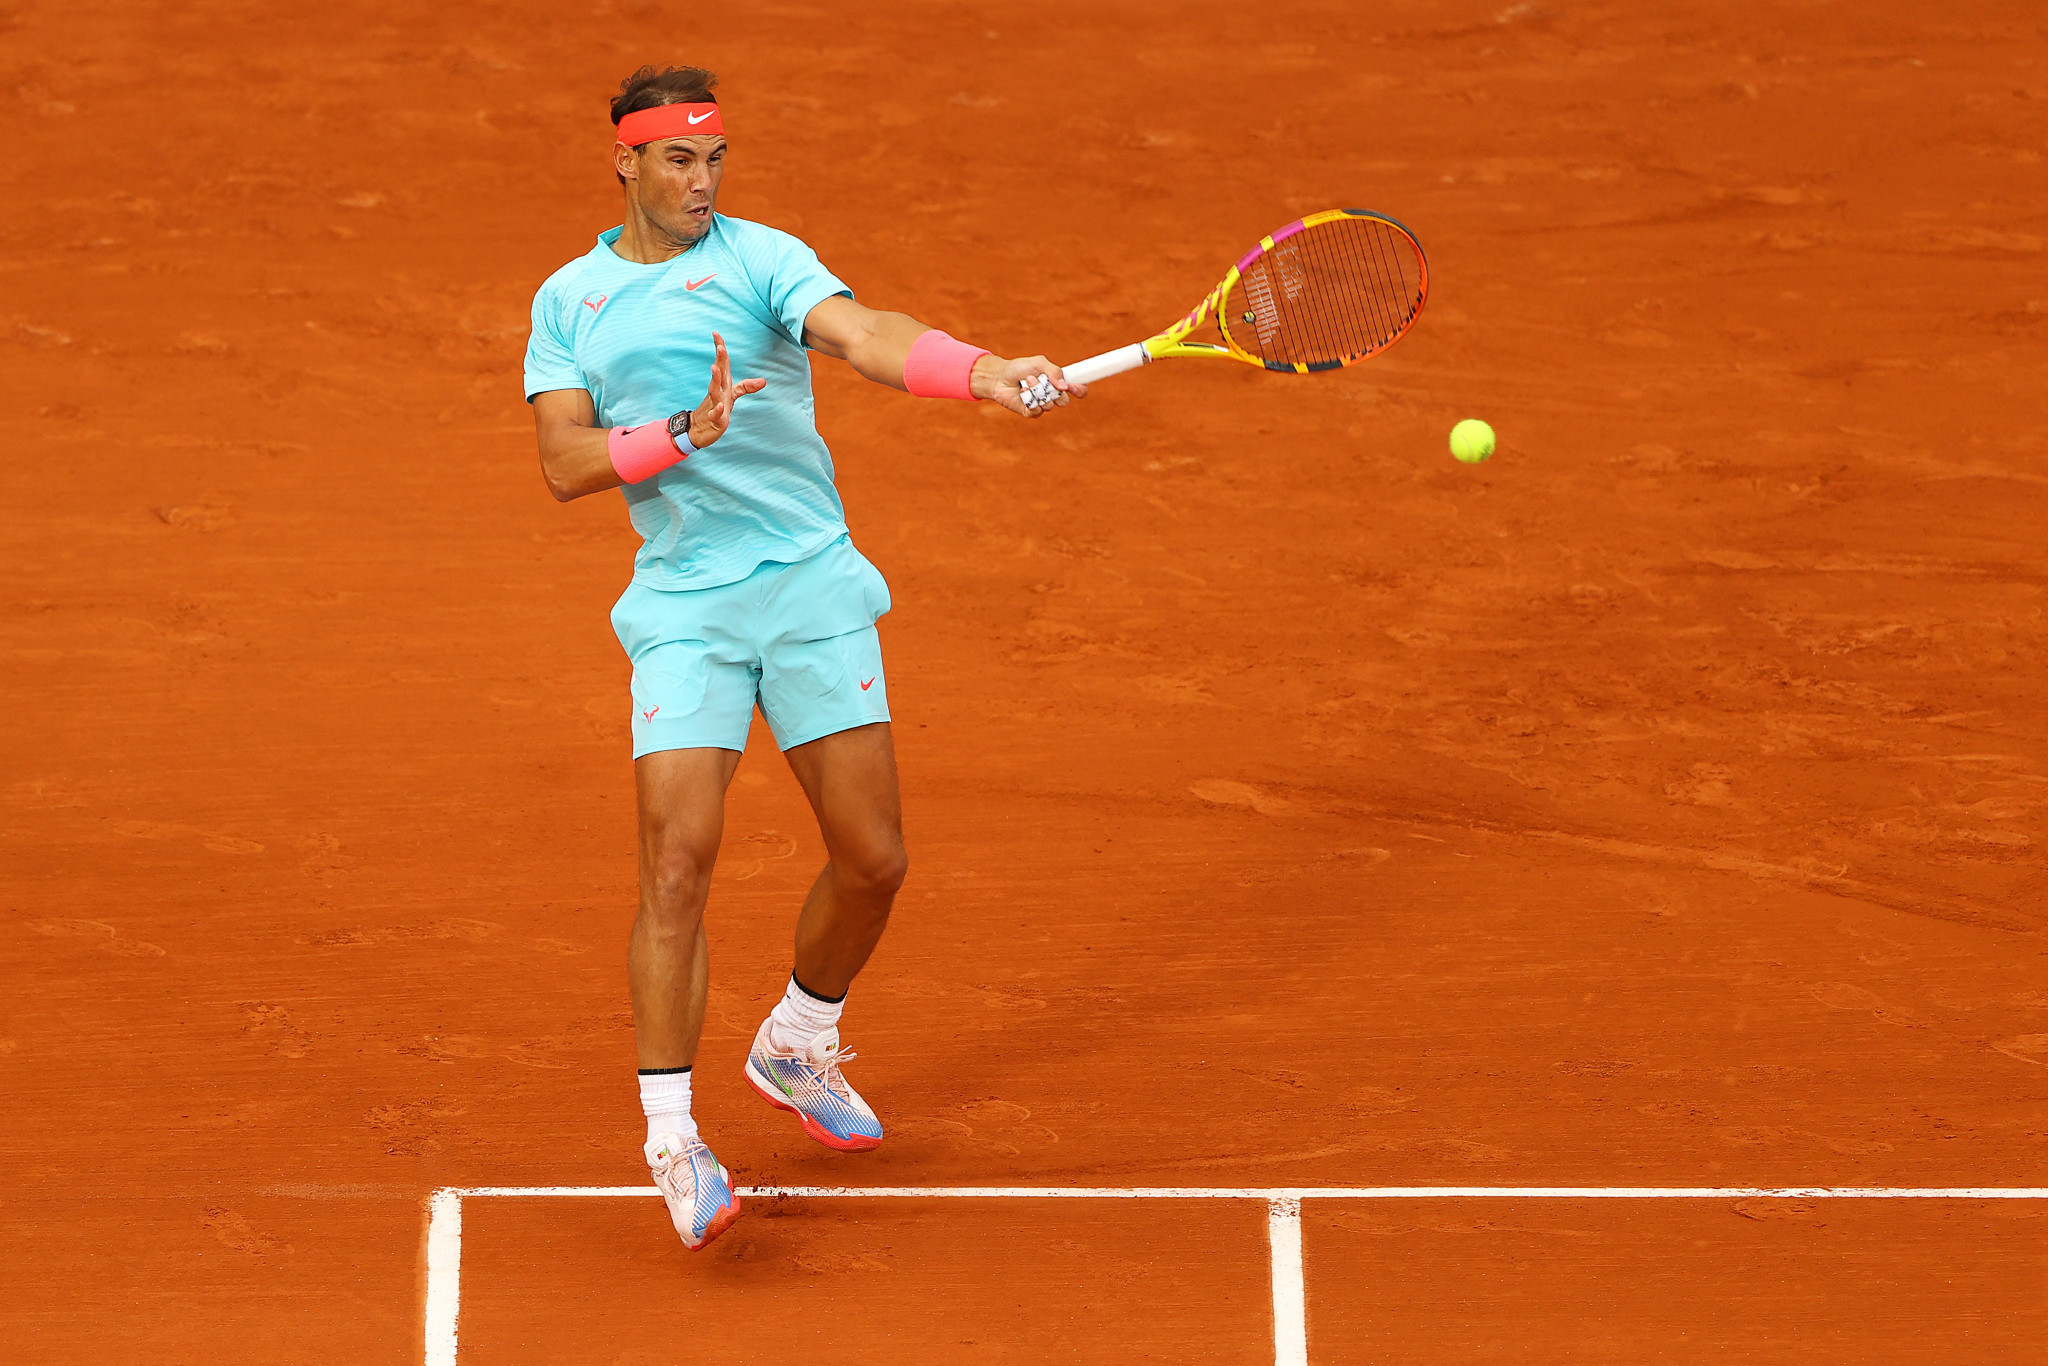 Spain's Rafael Nadal progressed from round one in a bid to win a fourth straight men's singles French Open title ©Getty Images